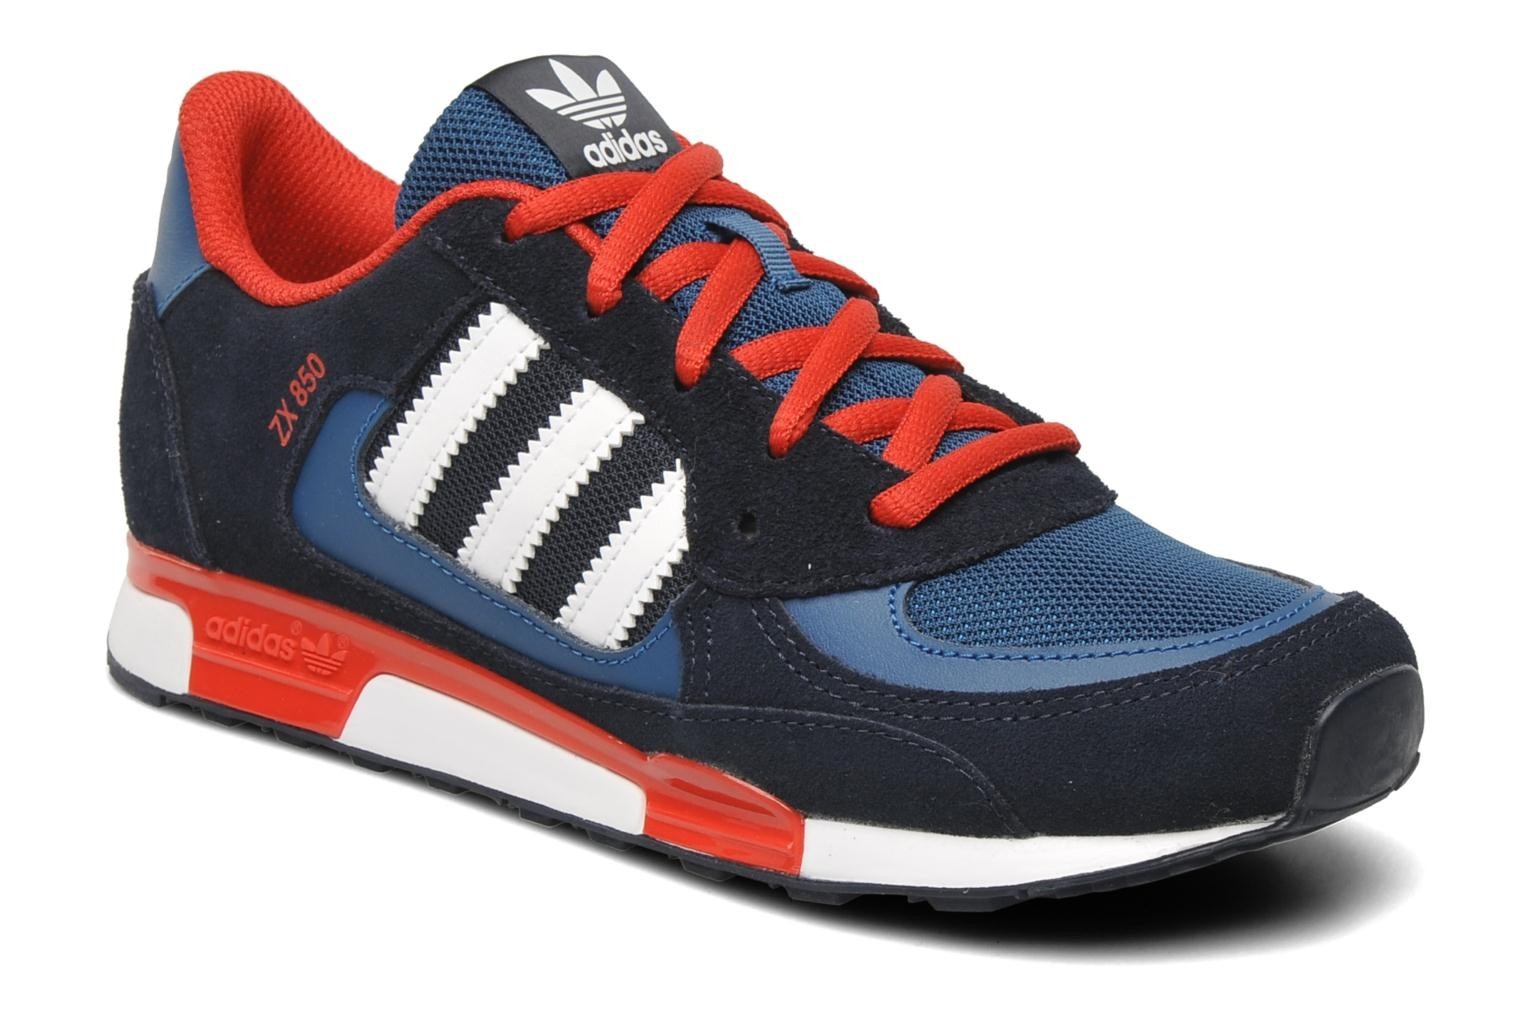 adidas zx 850 review